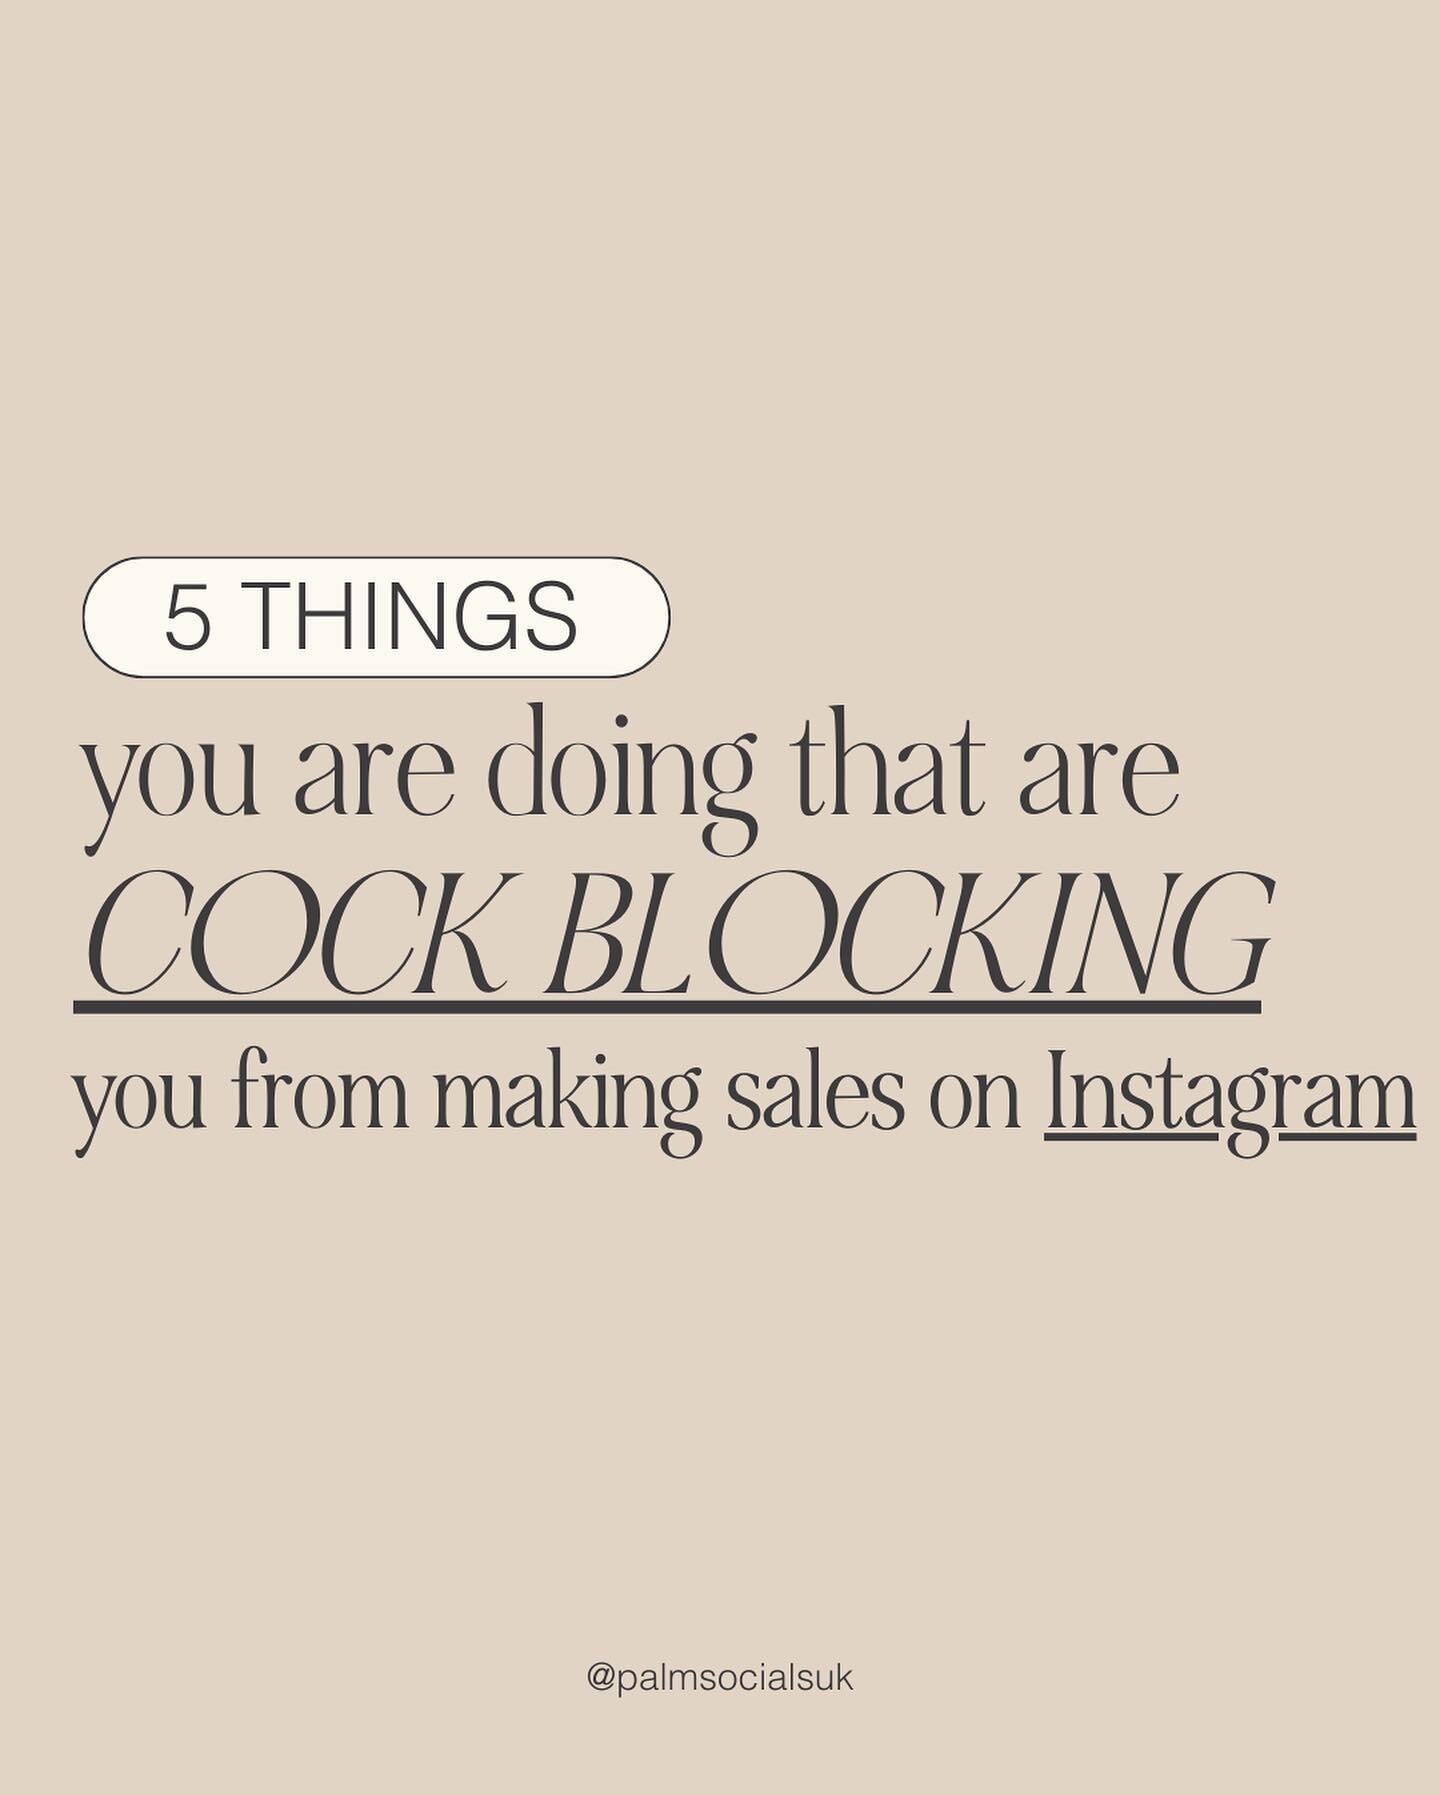 💾 SAVE this so that you can make more sales from your Instagram 

-
-
-
-
-
#iggrowth #instagramstrategy #iggrowthtips #instagramstoryideas #instagramstorytemplates #instagramgrowth #igstories #igstory #instagramgrowthtips #instagramgrowthhacks #con